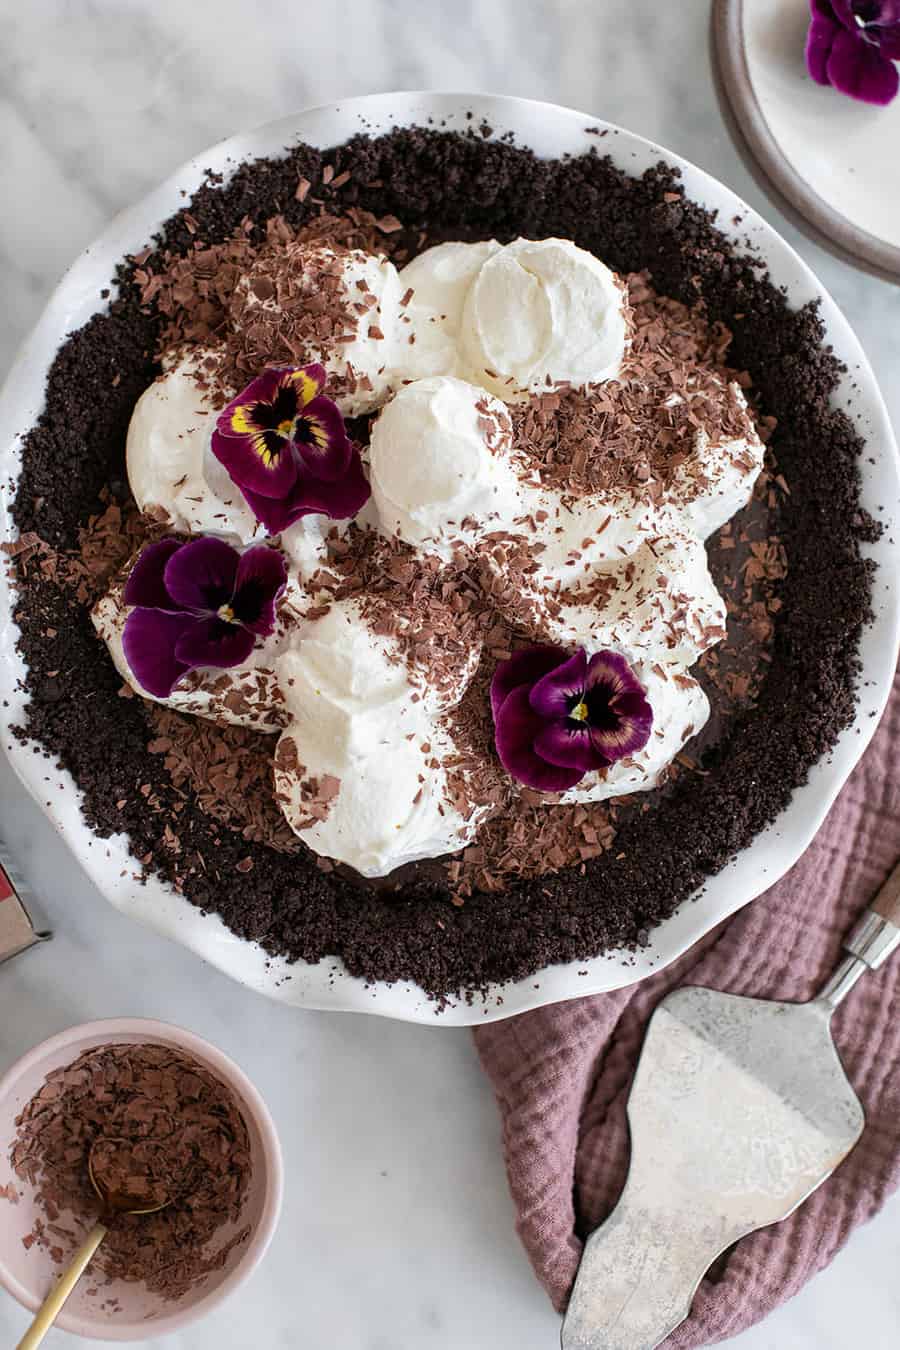 Chocolate pie with whipped cream and edible flowers